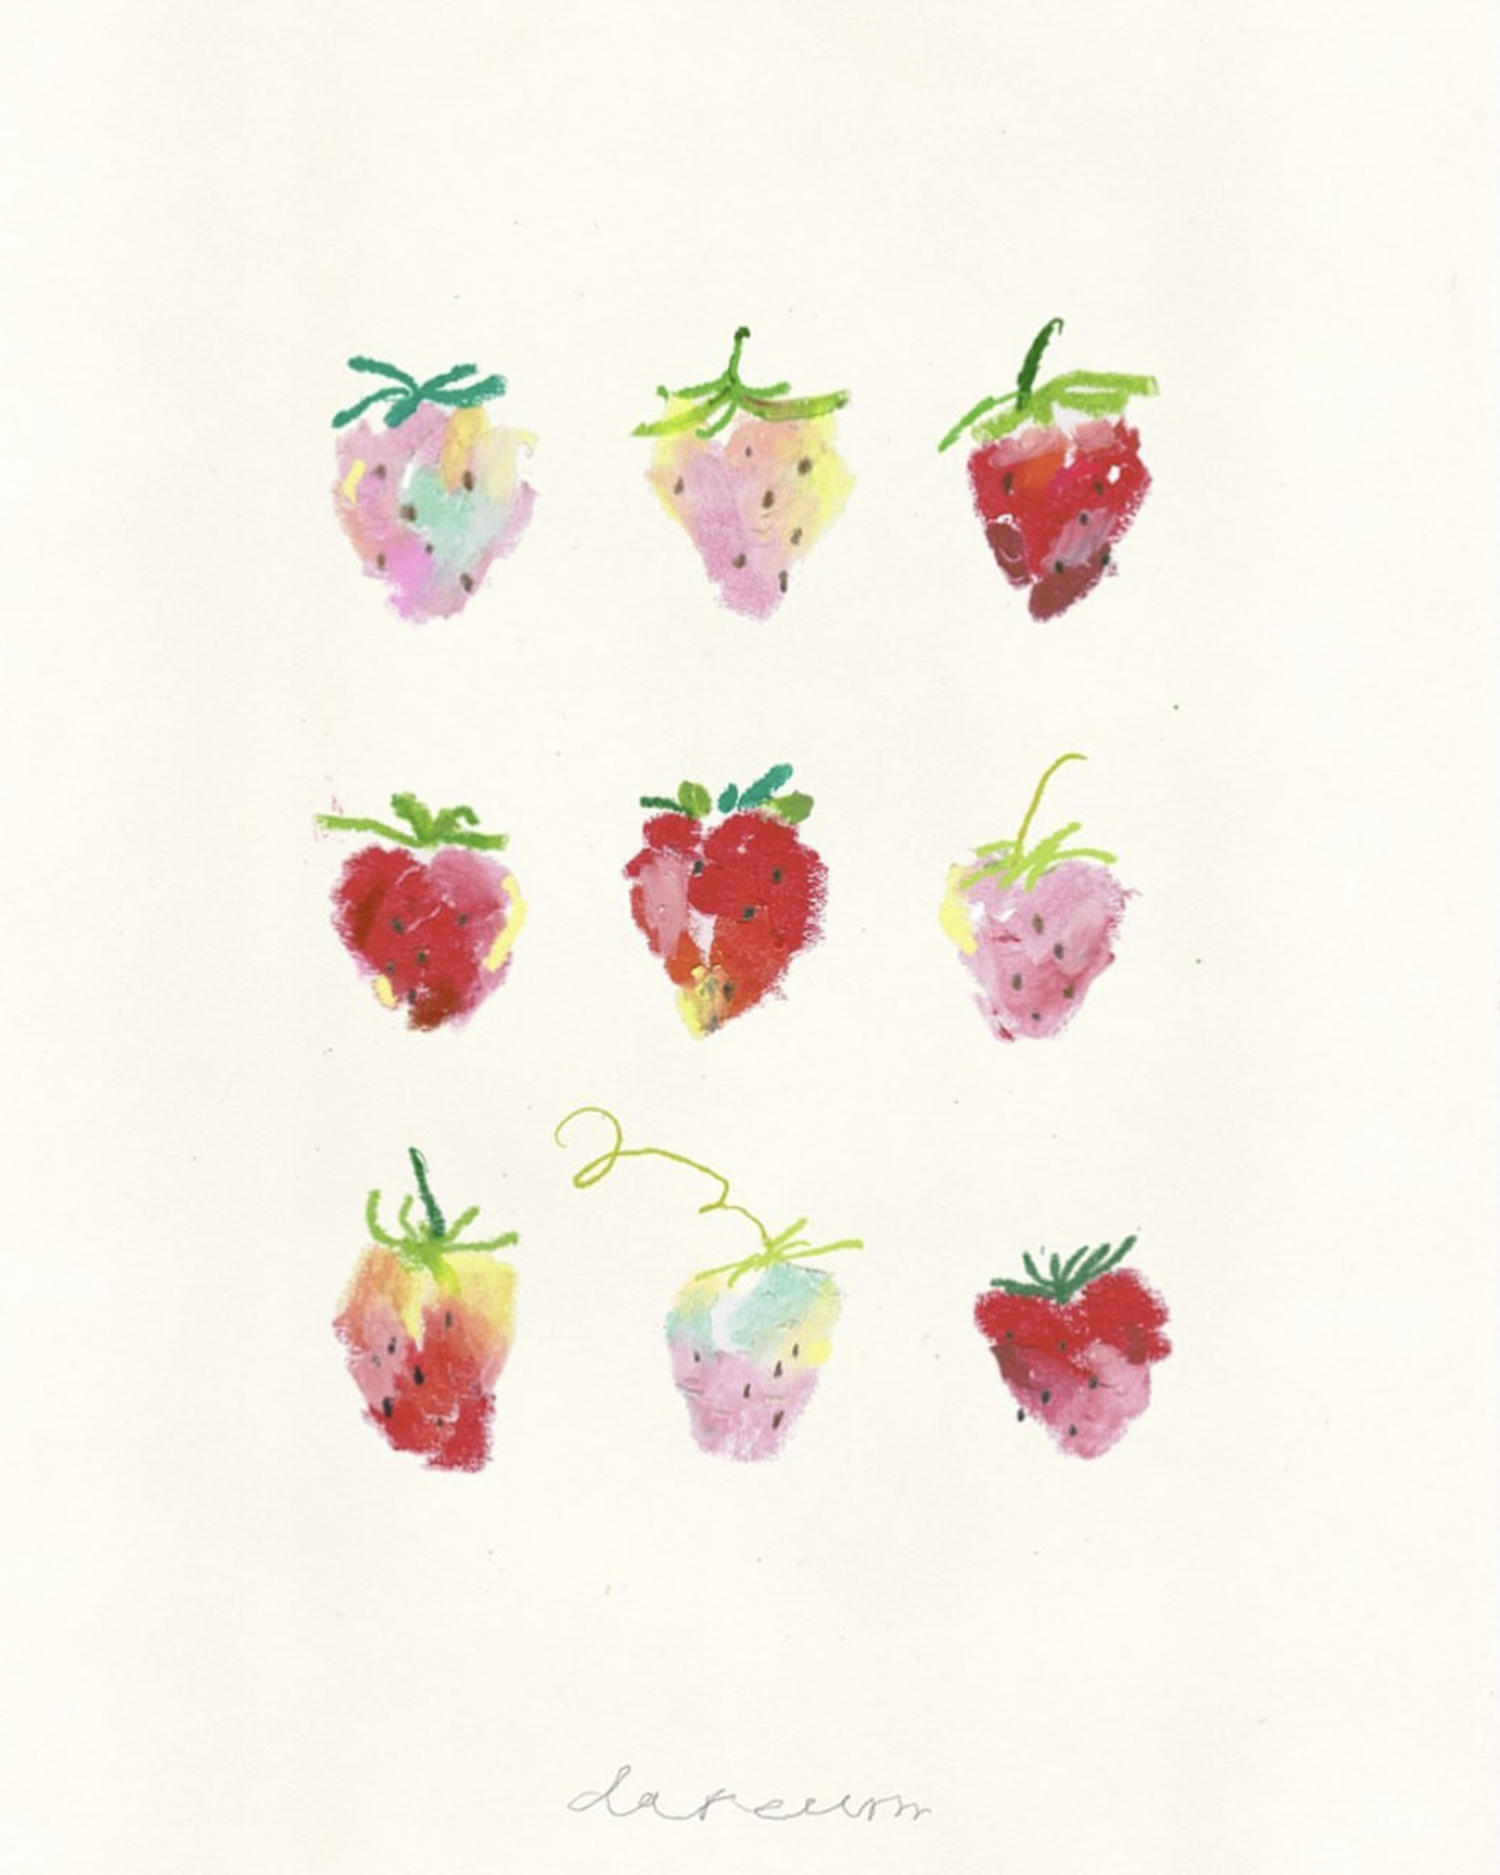 oil pastel drawing of strawberries on paper by dareum